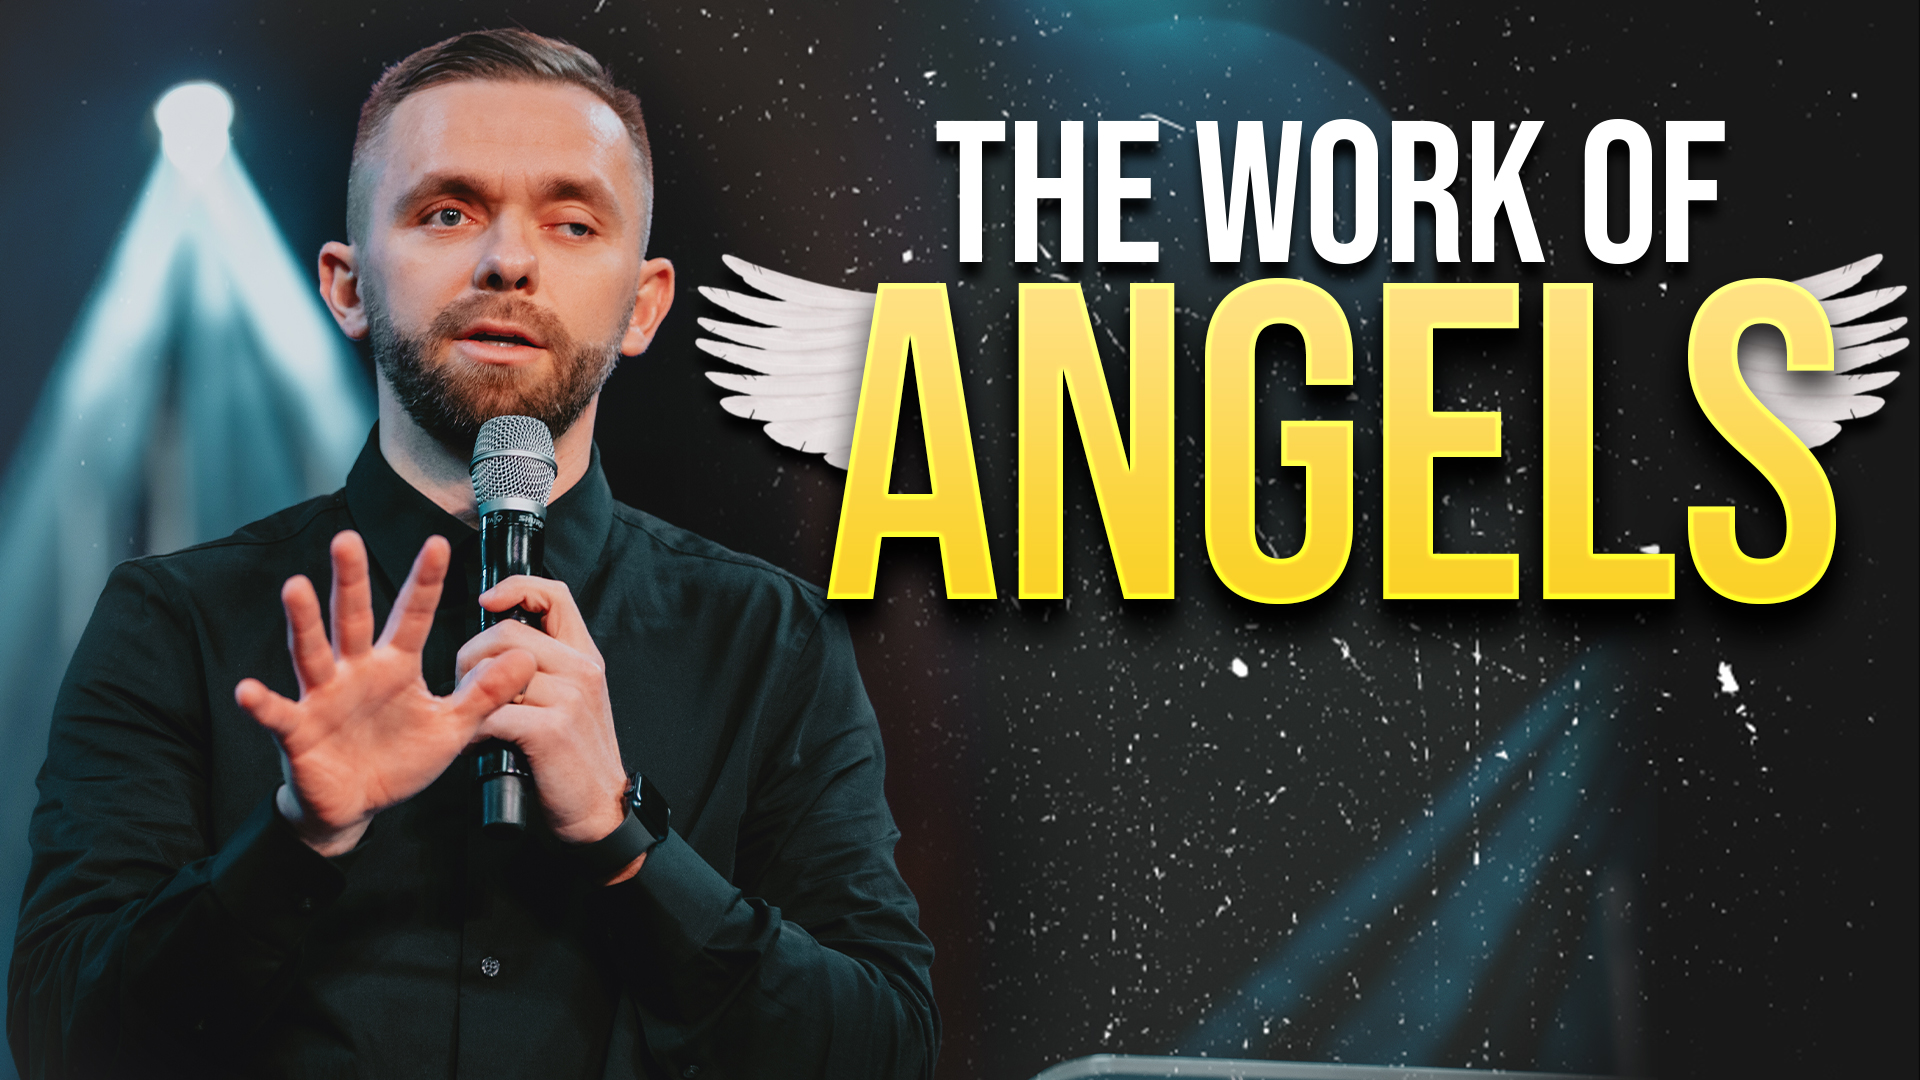 Featured image for “The Work of Angels”